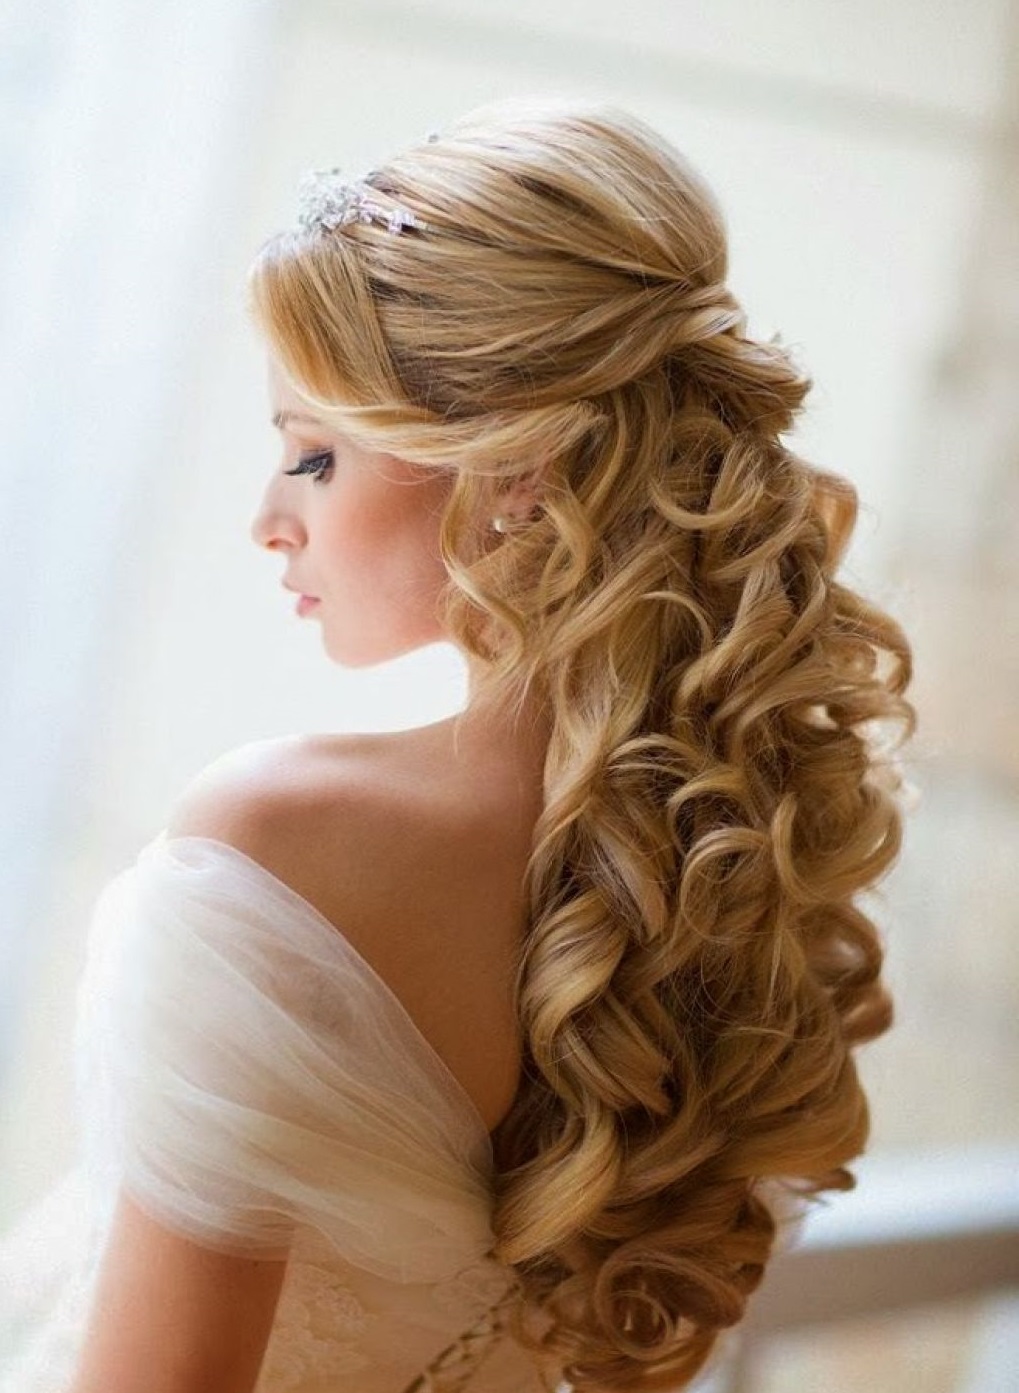 39 Amazing Wedding Hairstyles for Thin Hair! – HairStyles for Women